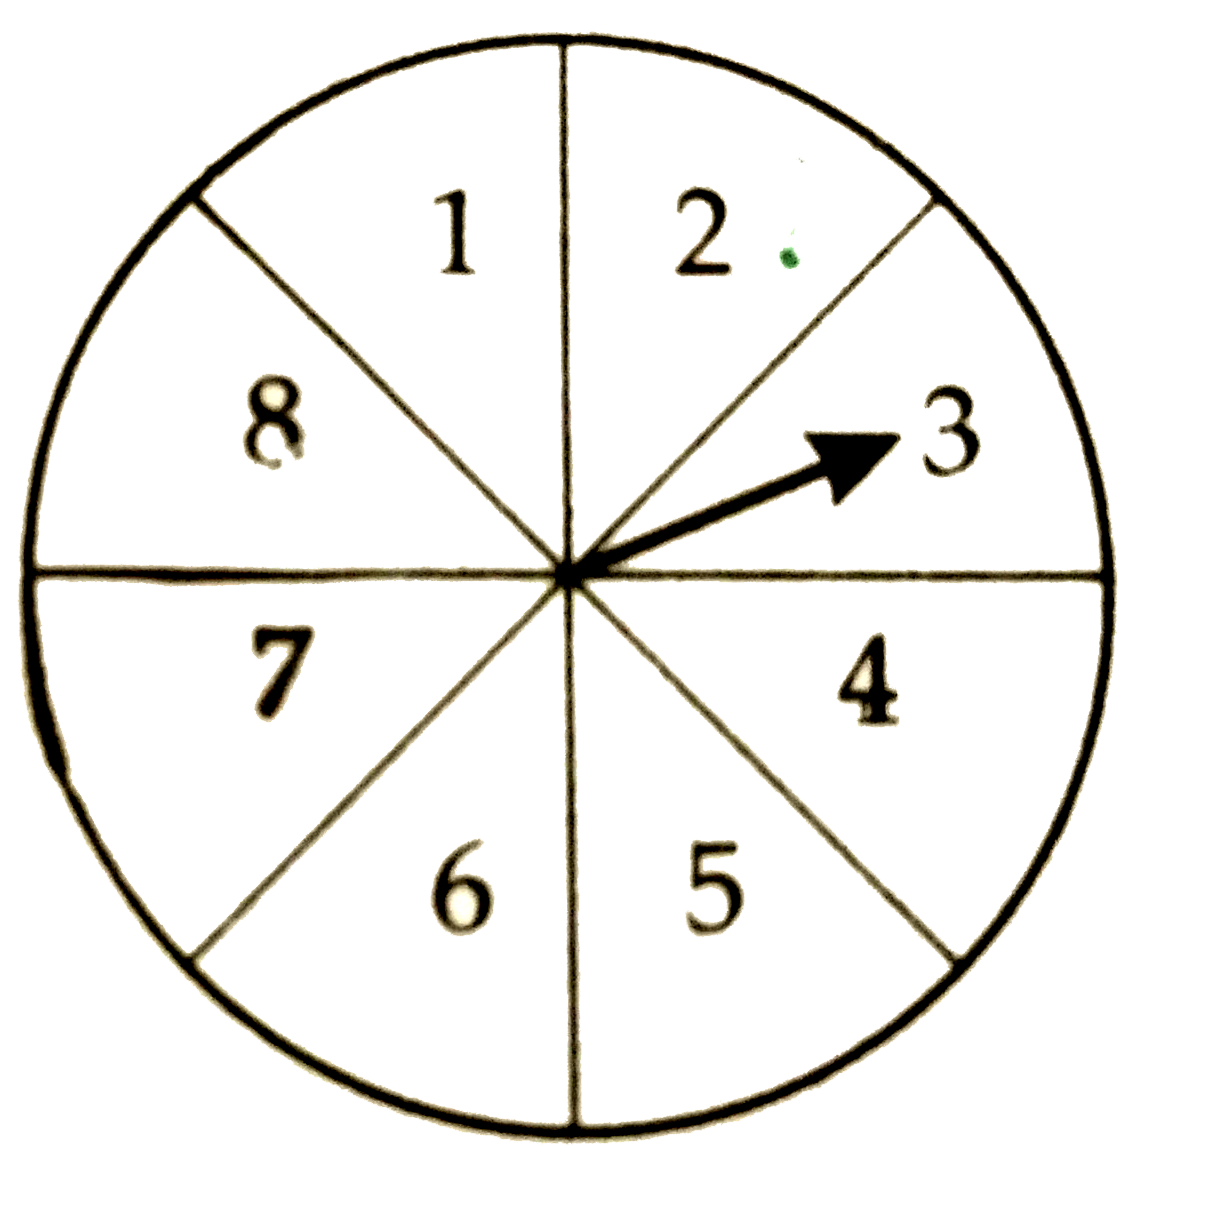 In a game of chance, a spinnig arrow comes to rest at one of the numbers 1,2,3,4,5,6,7,8. All these are equally likely outcomes. Find the probability that it wil rest at an odd number.